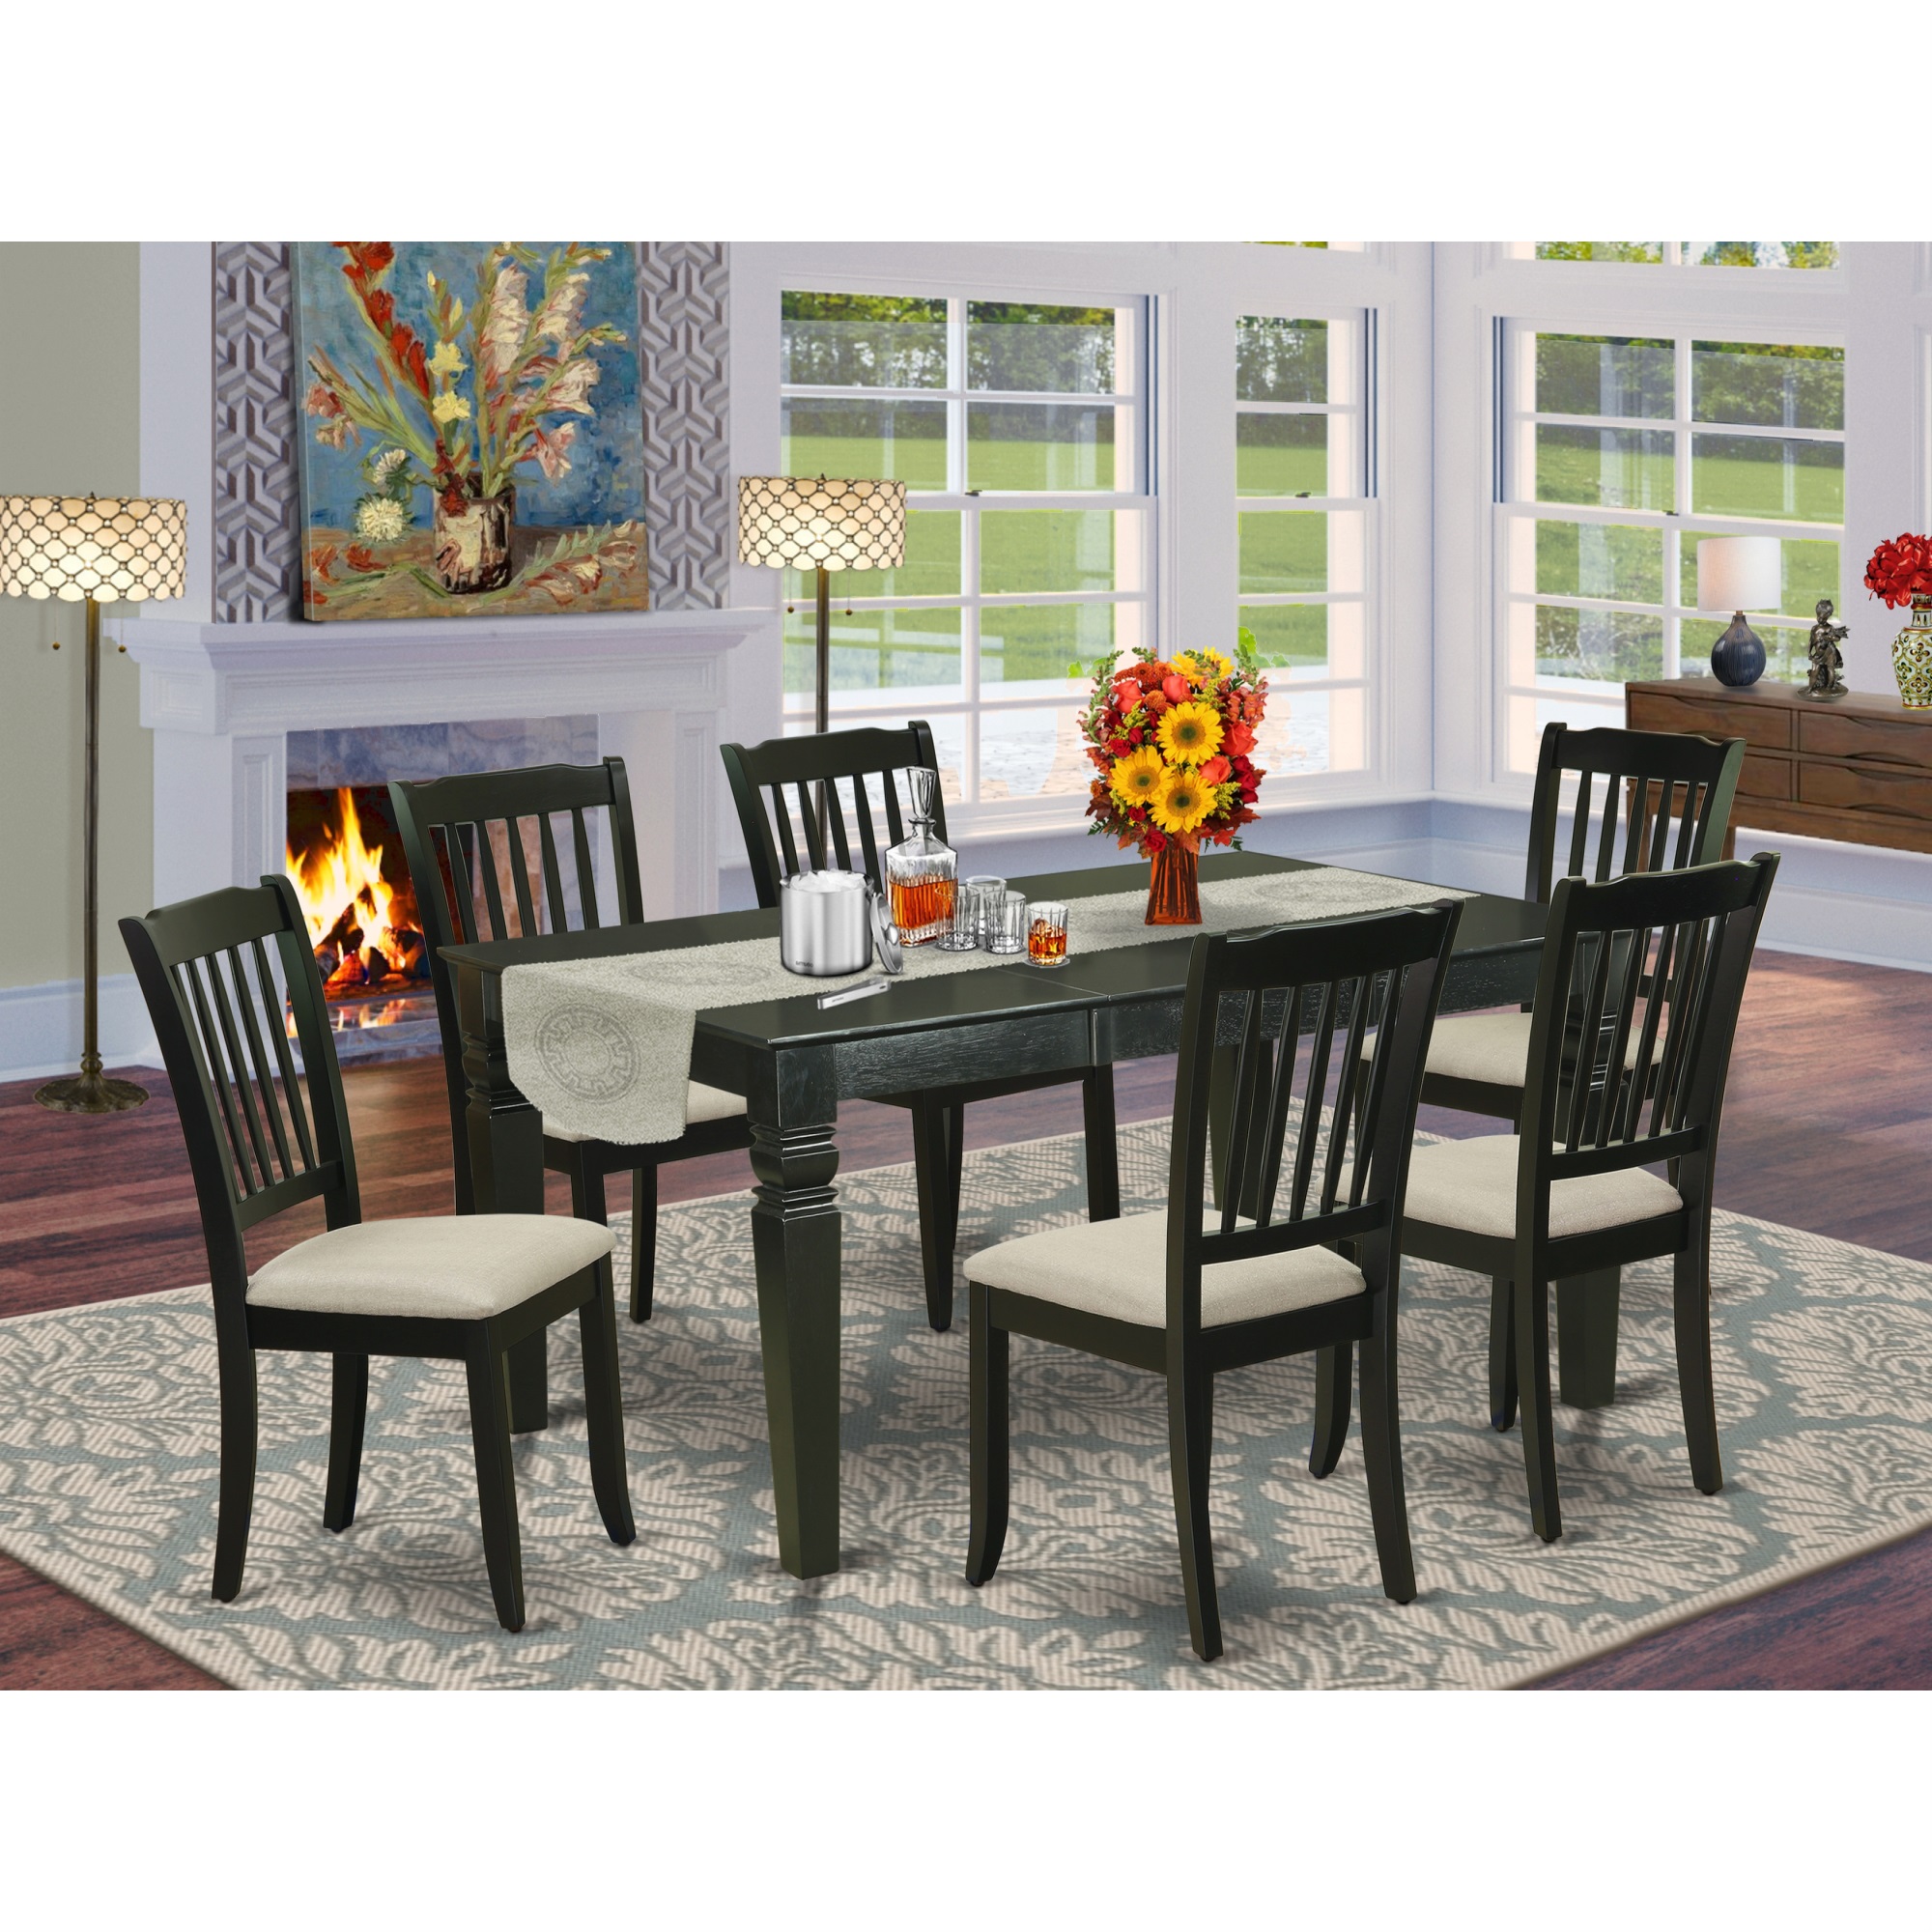 East West Furniture WEDA7-BLK-C 7Pc Dinette Set Includes a Rectangular Kitchen Table with Butterfly Leaf and Six Vertical Slatted Linen Seat Dinin